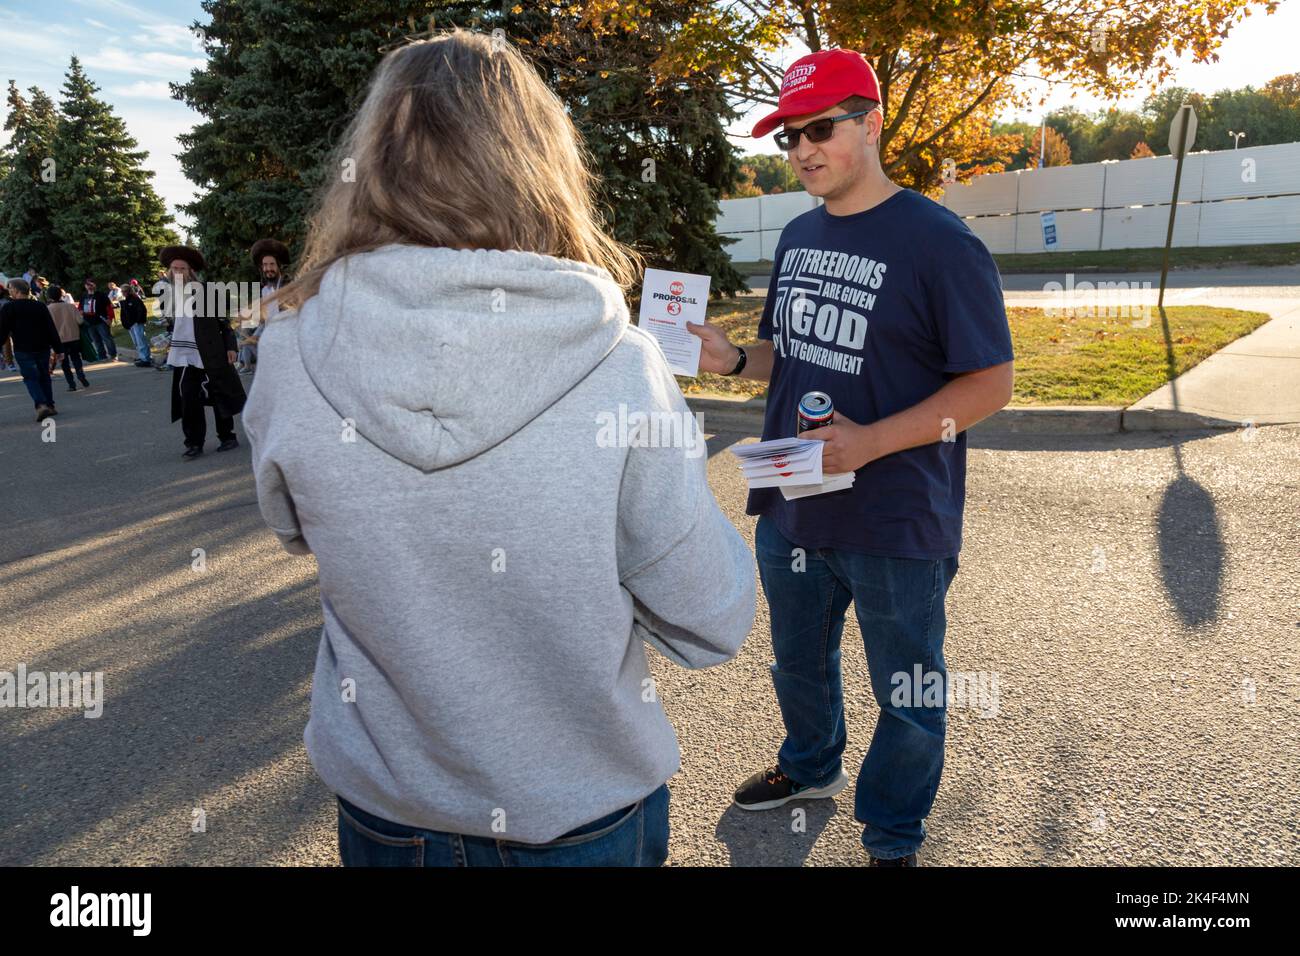 Warren, Michigan, USA. 1st Oct, 2022. Joshua Hillwig, talks with people arriving at a Donald Trump rally. He is urging them to vote against Proposal 3 in Michigan's November election. Proposal 3 would add the right to abortion to Michigan's constitution. Credit: Jim West/Alamy Live News Stock Photo